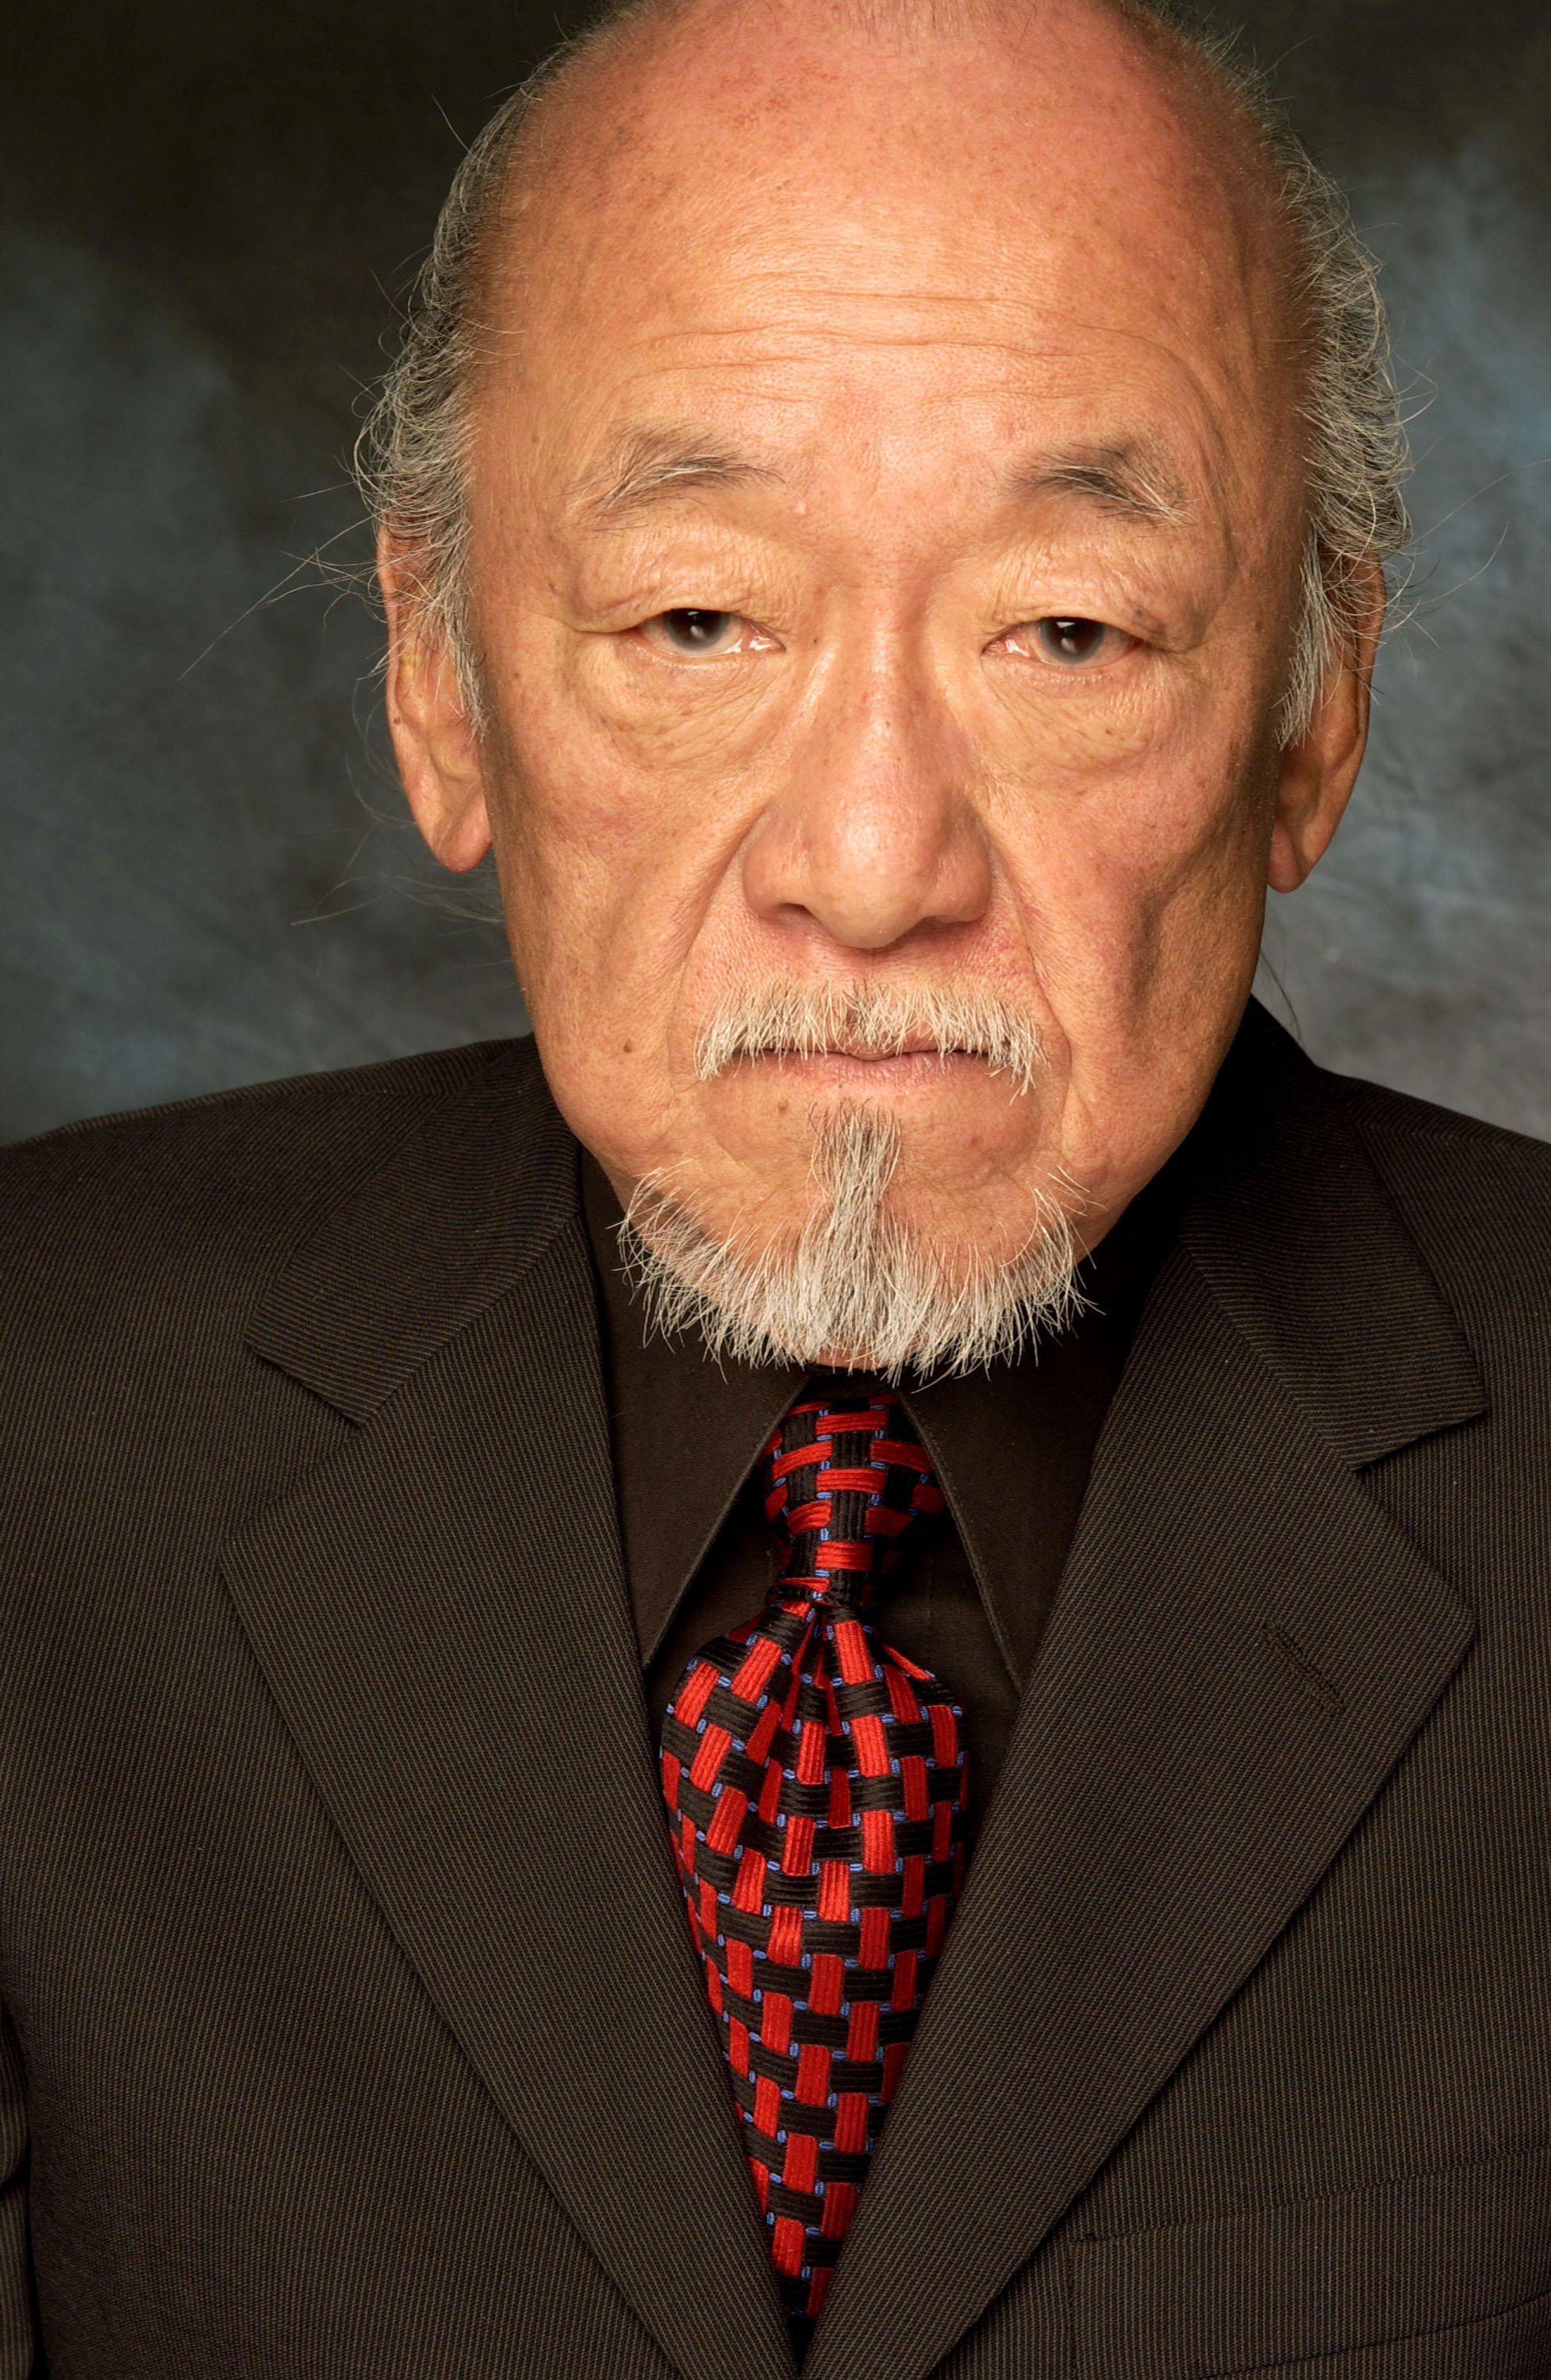 Pat Morita during CineVegas Film Festival 2003 posing for "Stuey" portraits at Palms Hotel in Las Vegas, Nevada. | Source: Getty Images